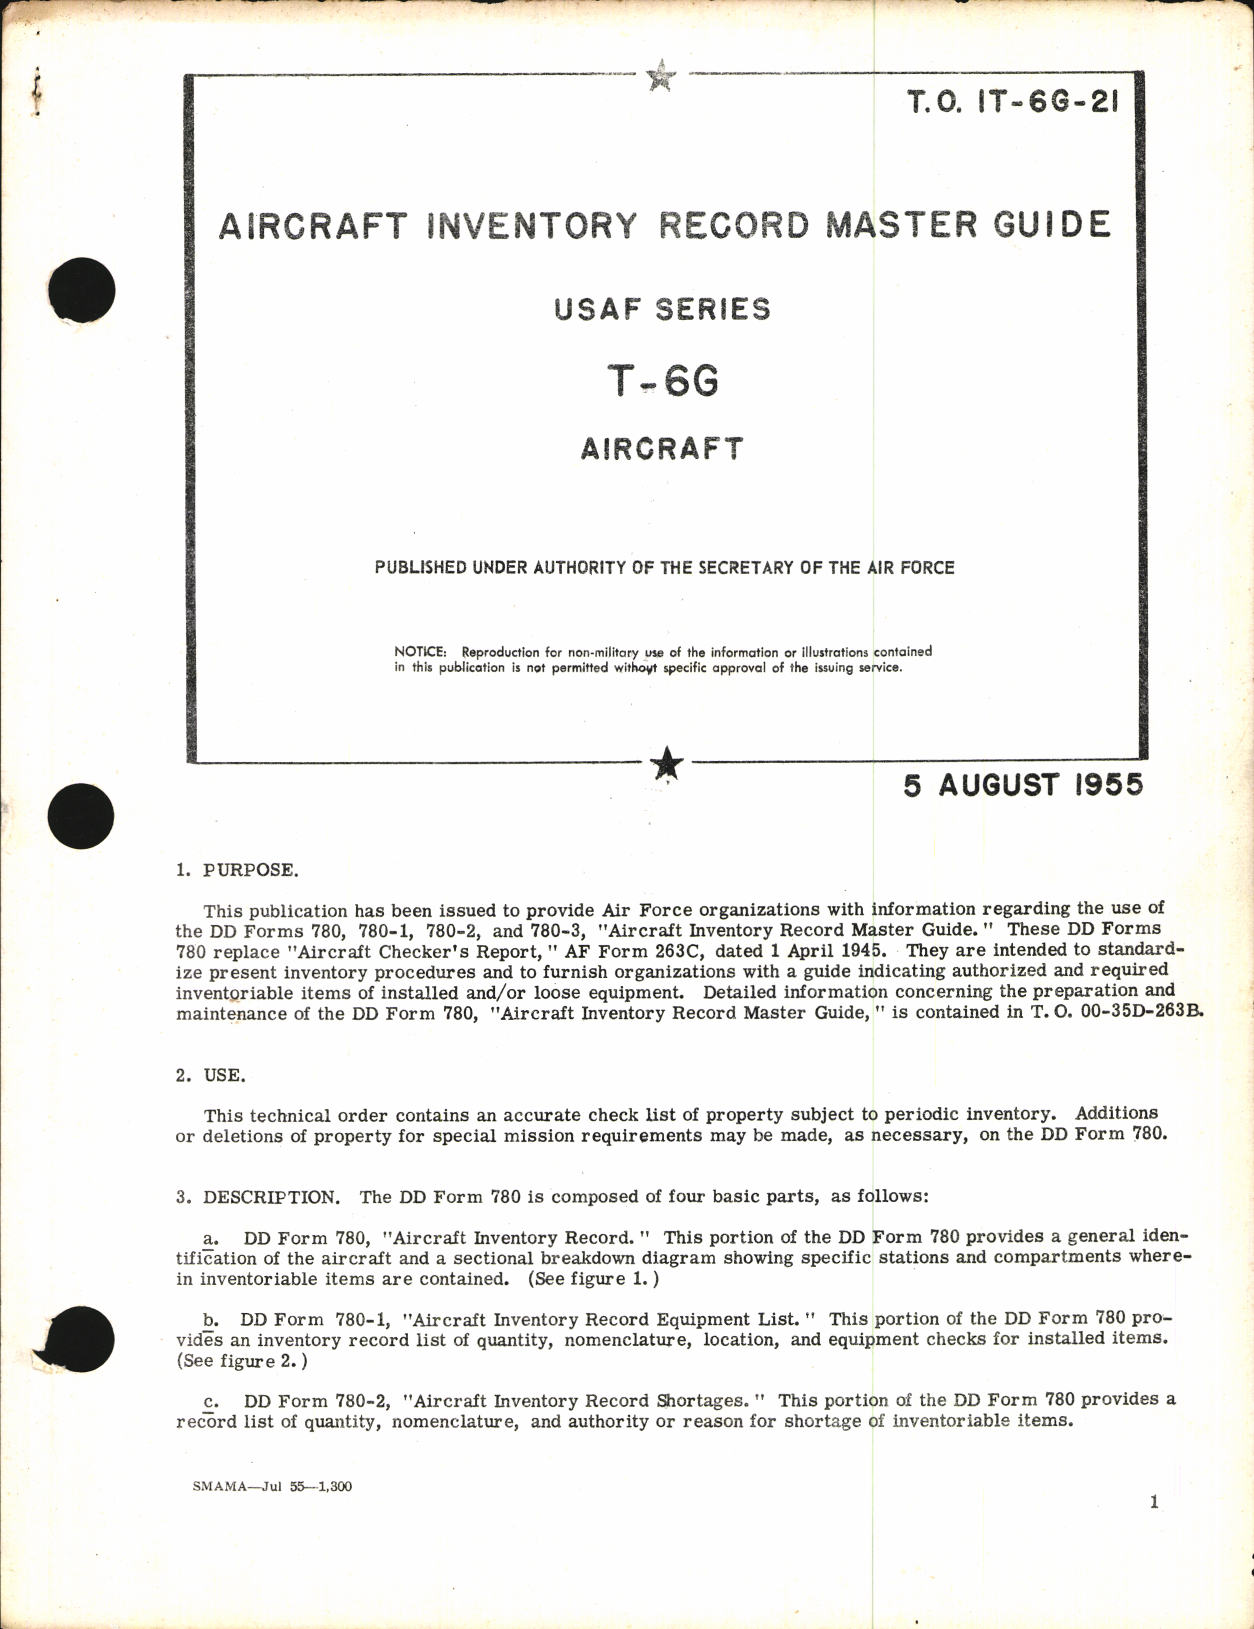 Sample page 1 from AirCorps Library document: Aircraft Inventory Record Master Guide for T-6G